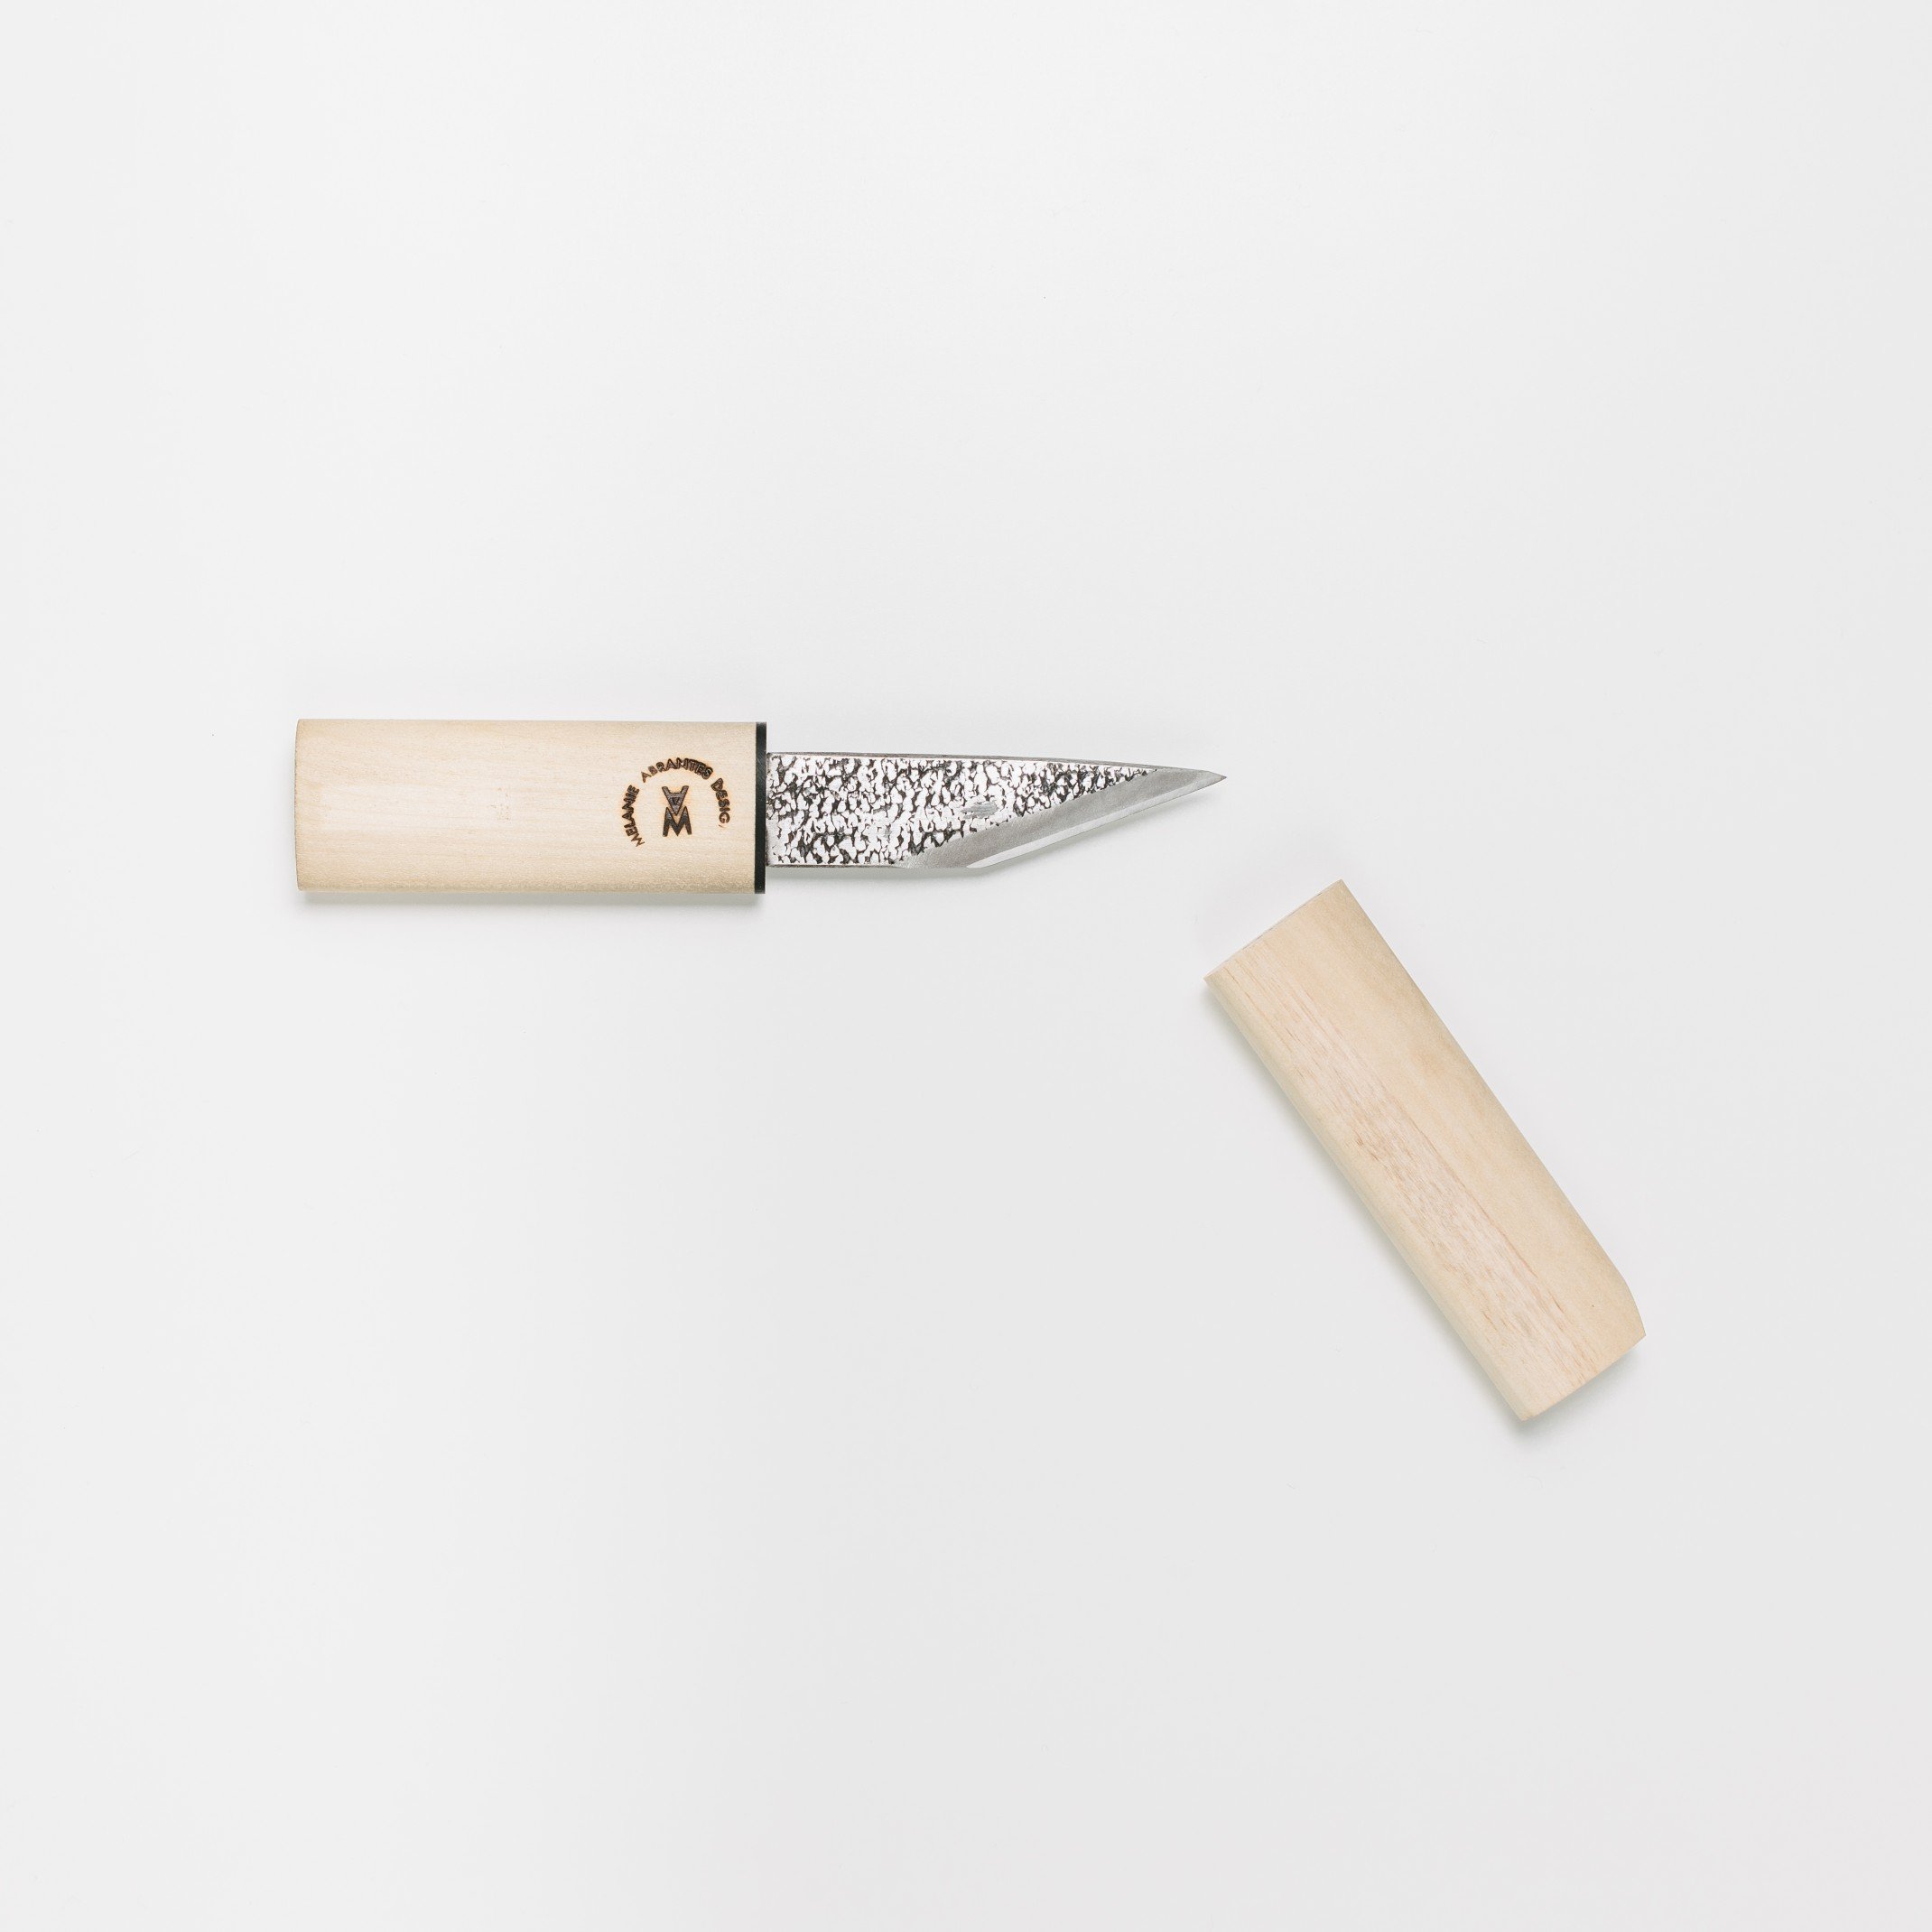 Carving Knife - $45